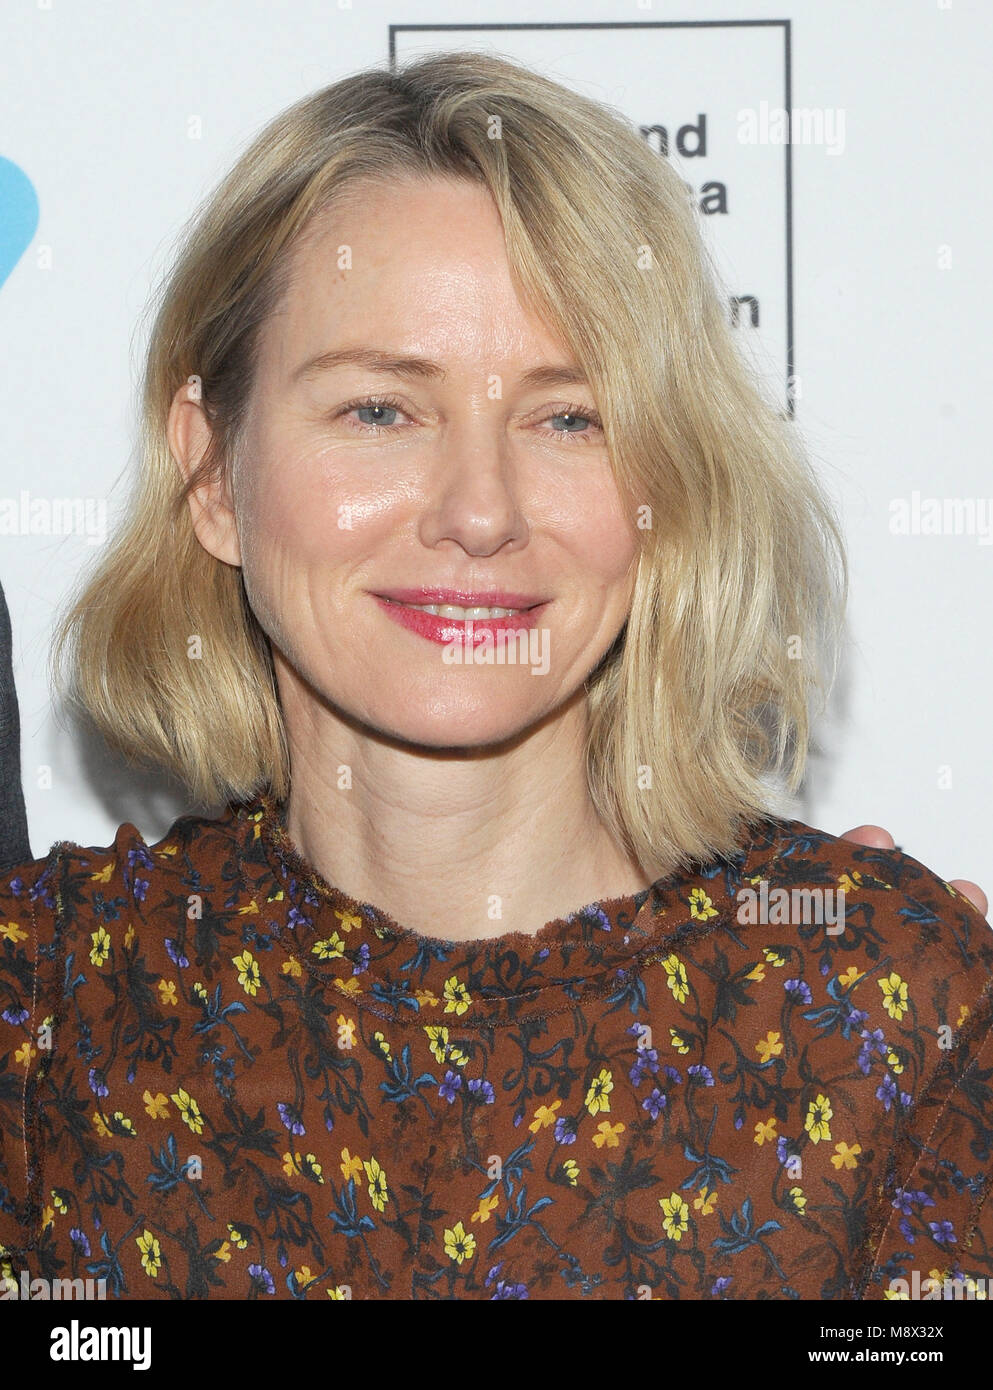 New York, NY, USA. 20th Mar, 2018. Actress Naomi Watts attend the 'Breath' premiere for the Australian International Screen Forum at Francesca Beale Theater on March 20, 2018 in New York City. Credit: John Palmer/Media Pnch/Alamy Live News Stock Photo